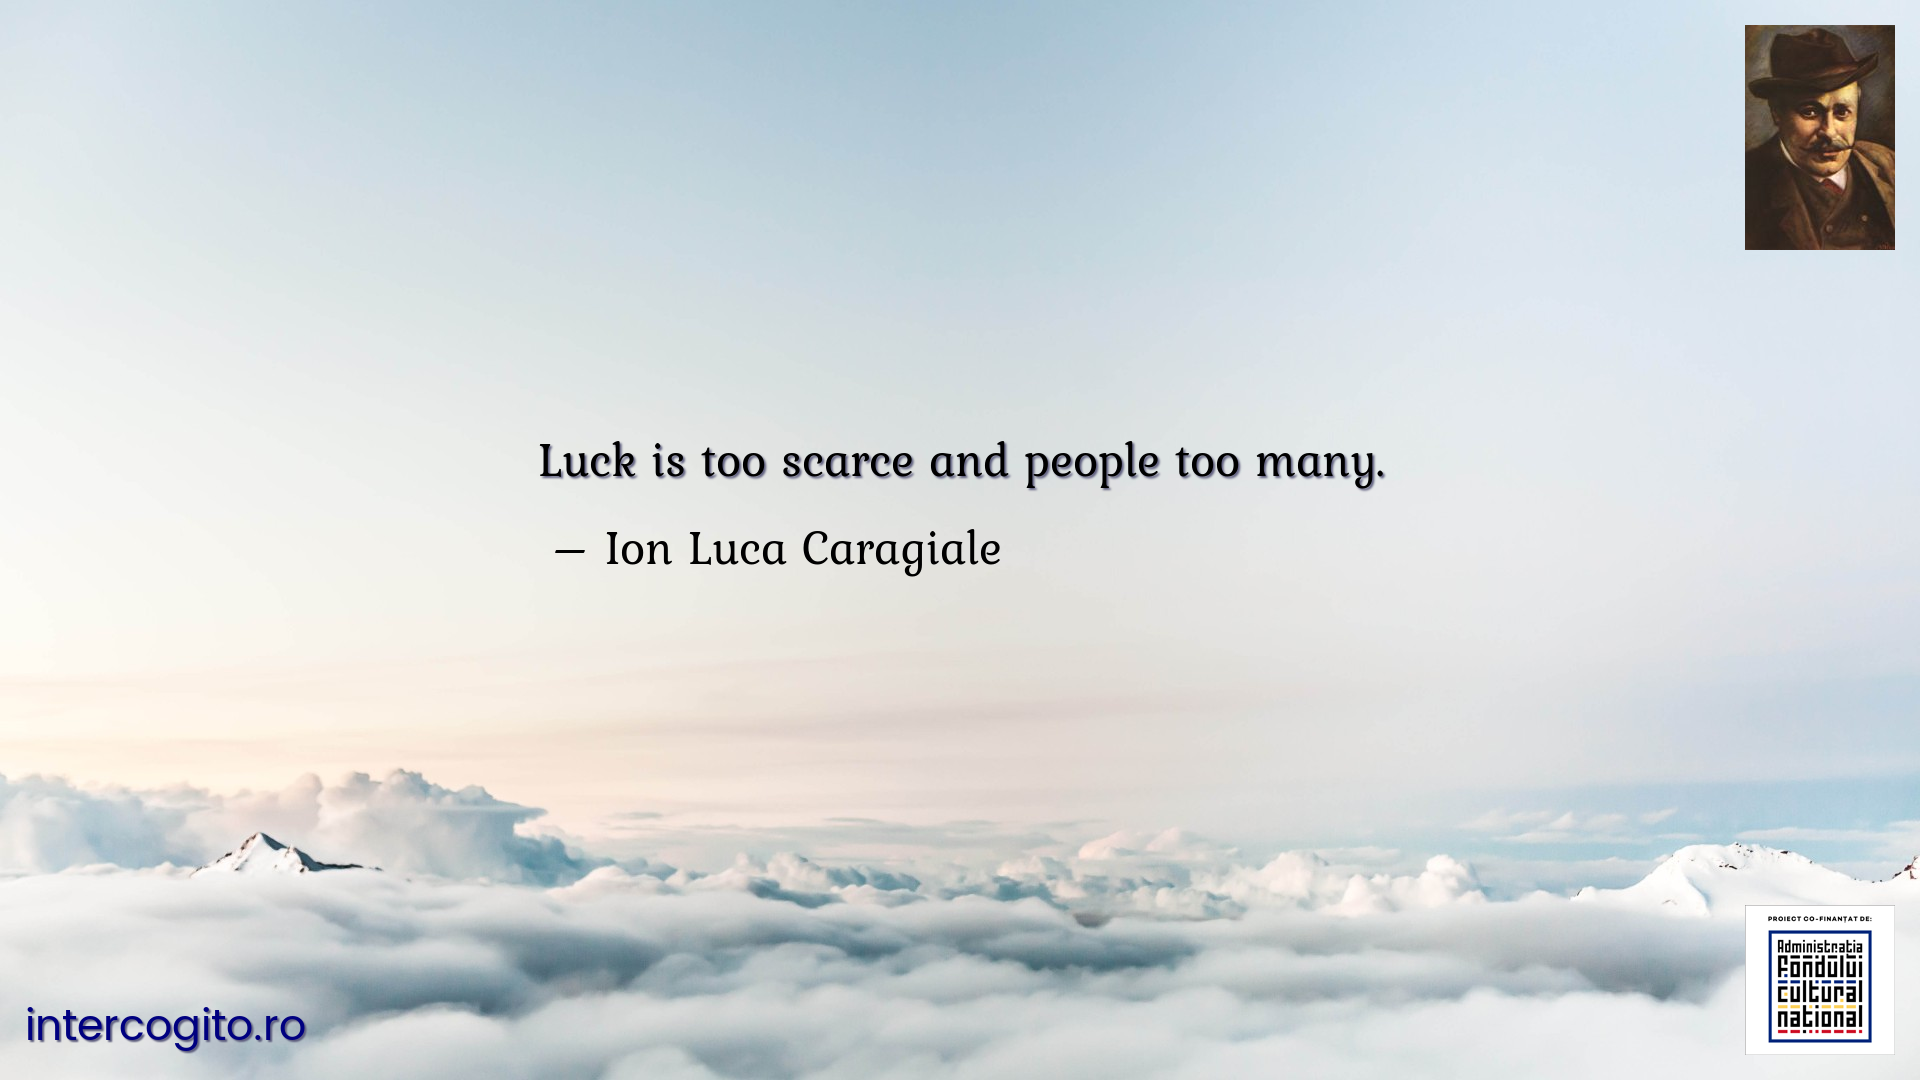 Luck is too scarce and people too many.